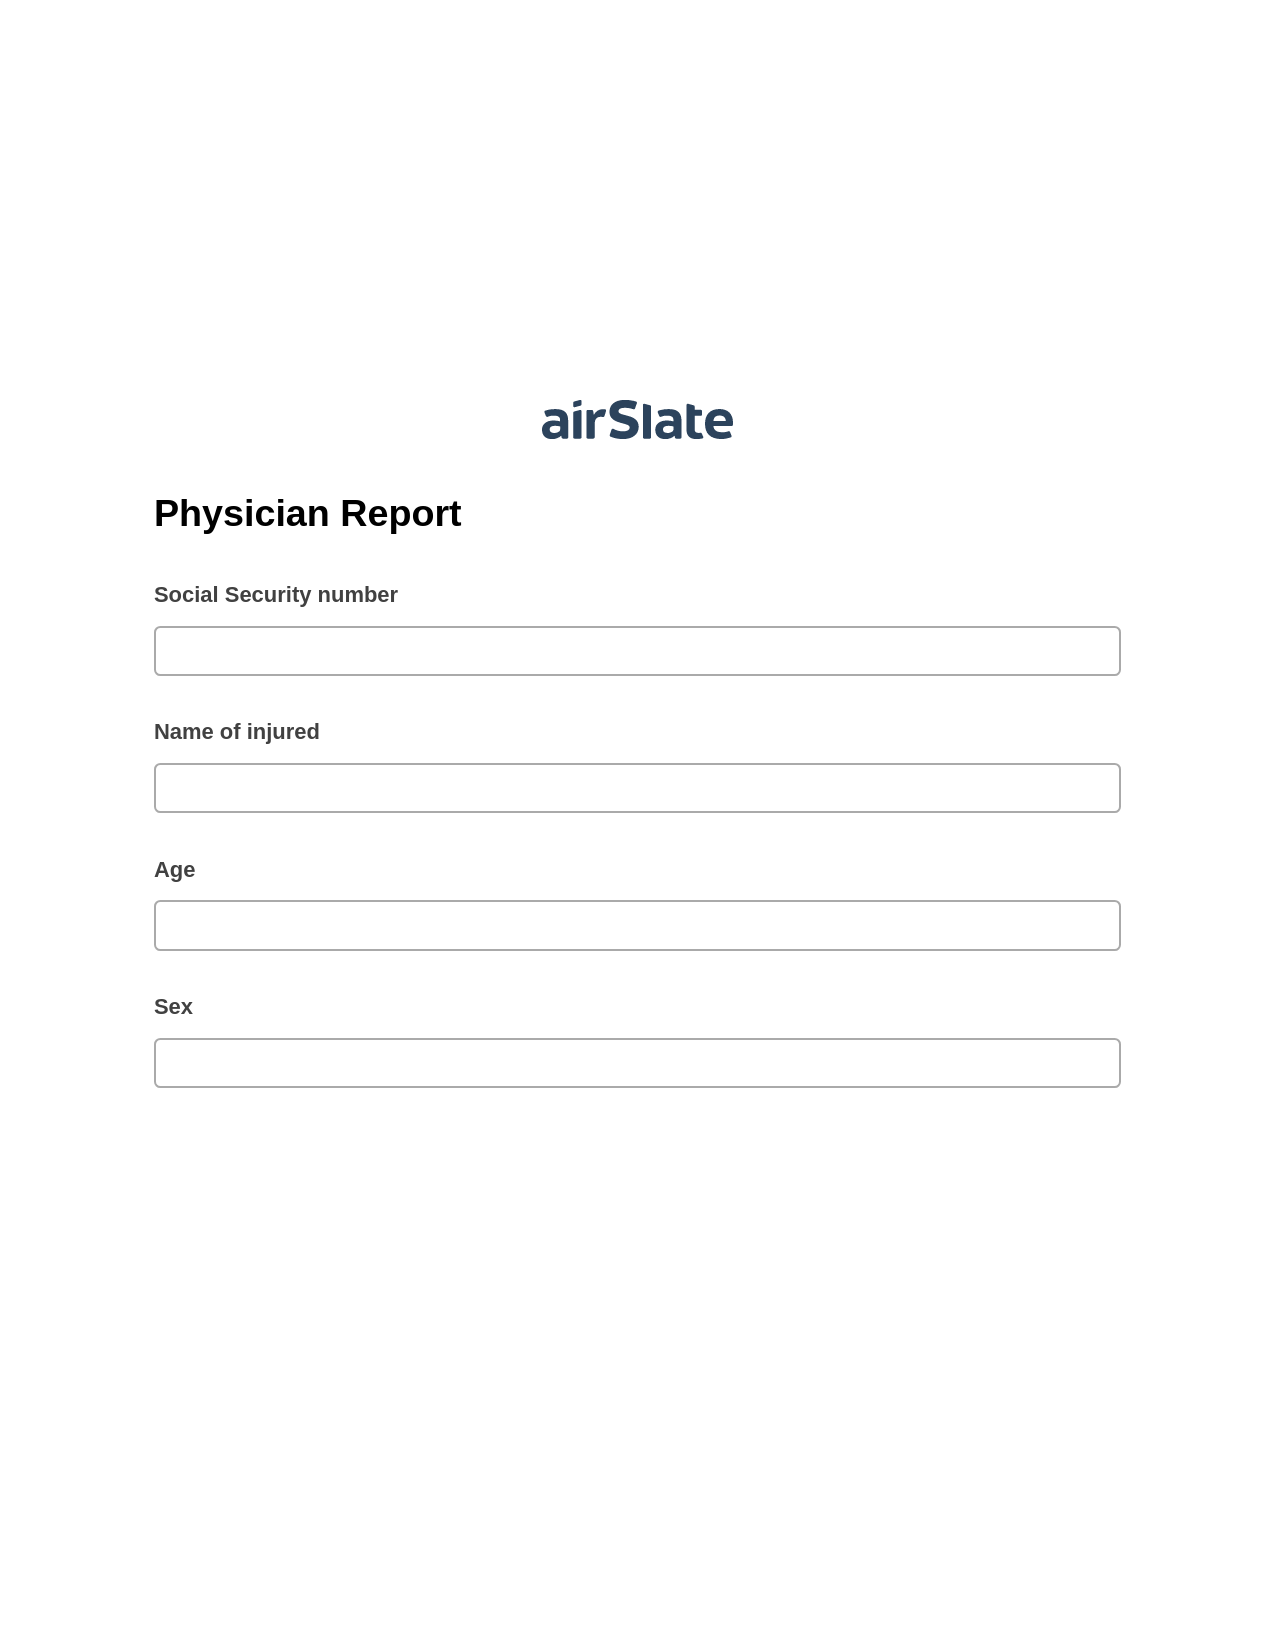 Physician Report Pre-fill from Litmos bot, Update NetSuite Record Bot, Export to Smartsheet